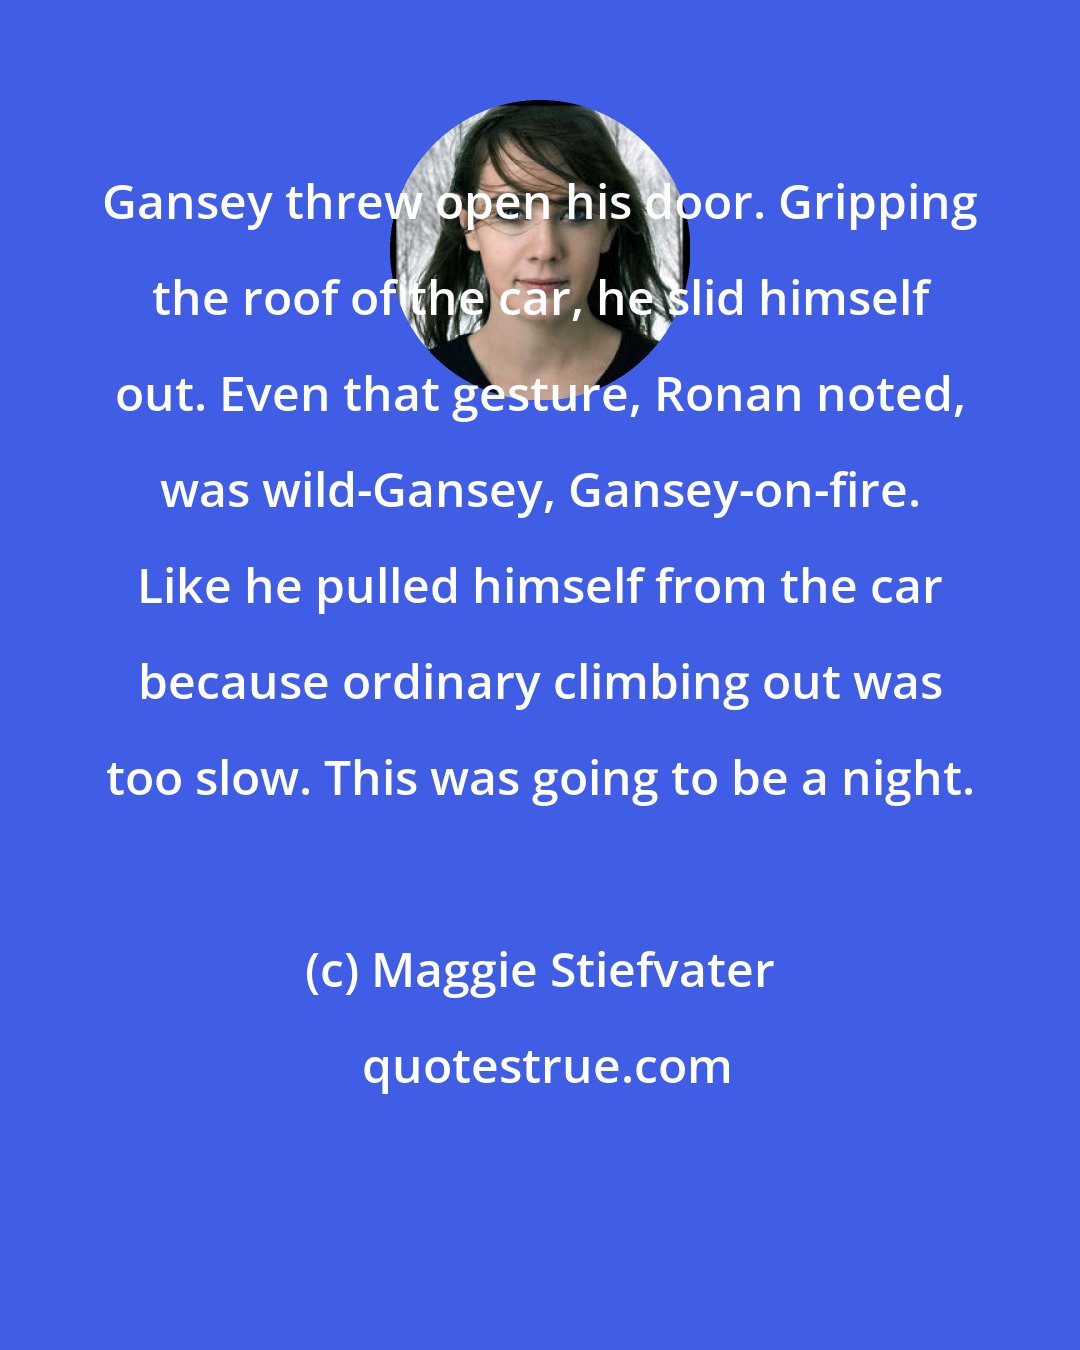 Maggie Stiefvater: Gansey threw open his door. Gripping the roof of the car, he slid himself out. Even that gesture, Ronan noted, was wild-Gansey, Gansey-on-fire. Like he pulled himself from the car because ordinary climbing out was too slow. This was going to be a night.